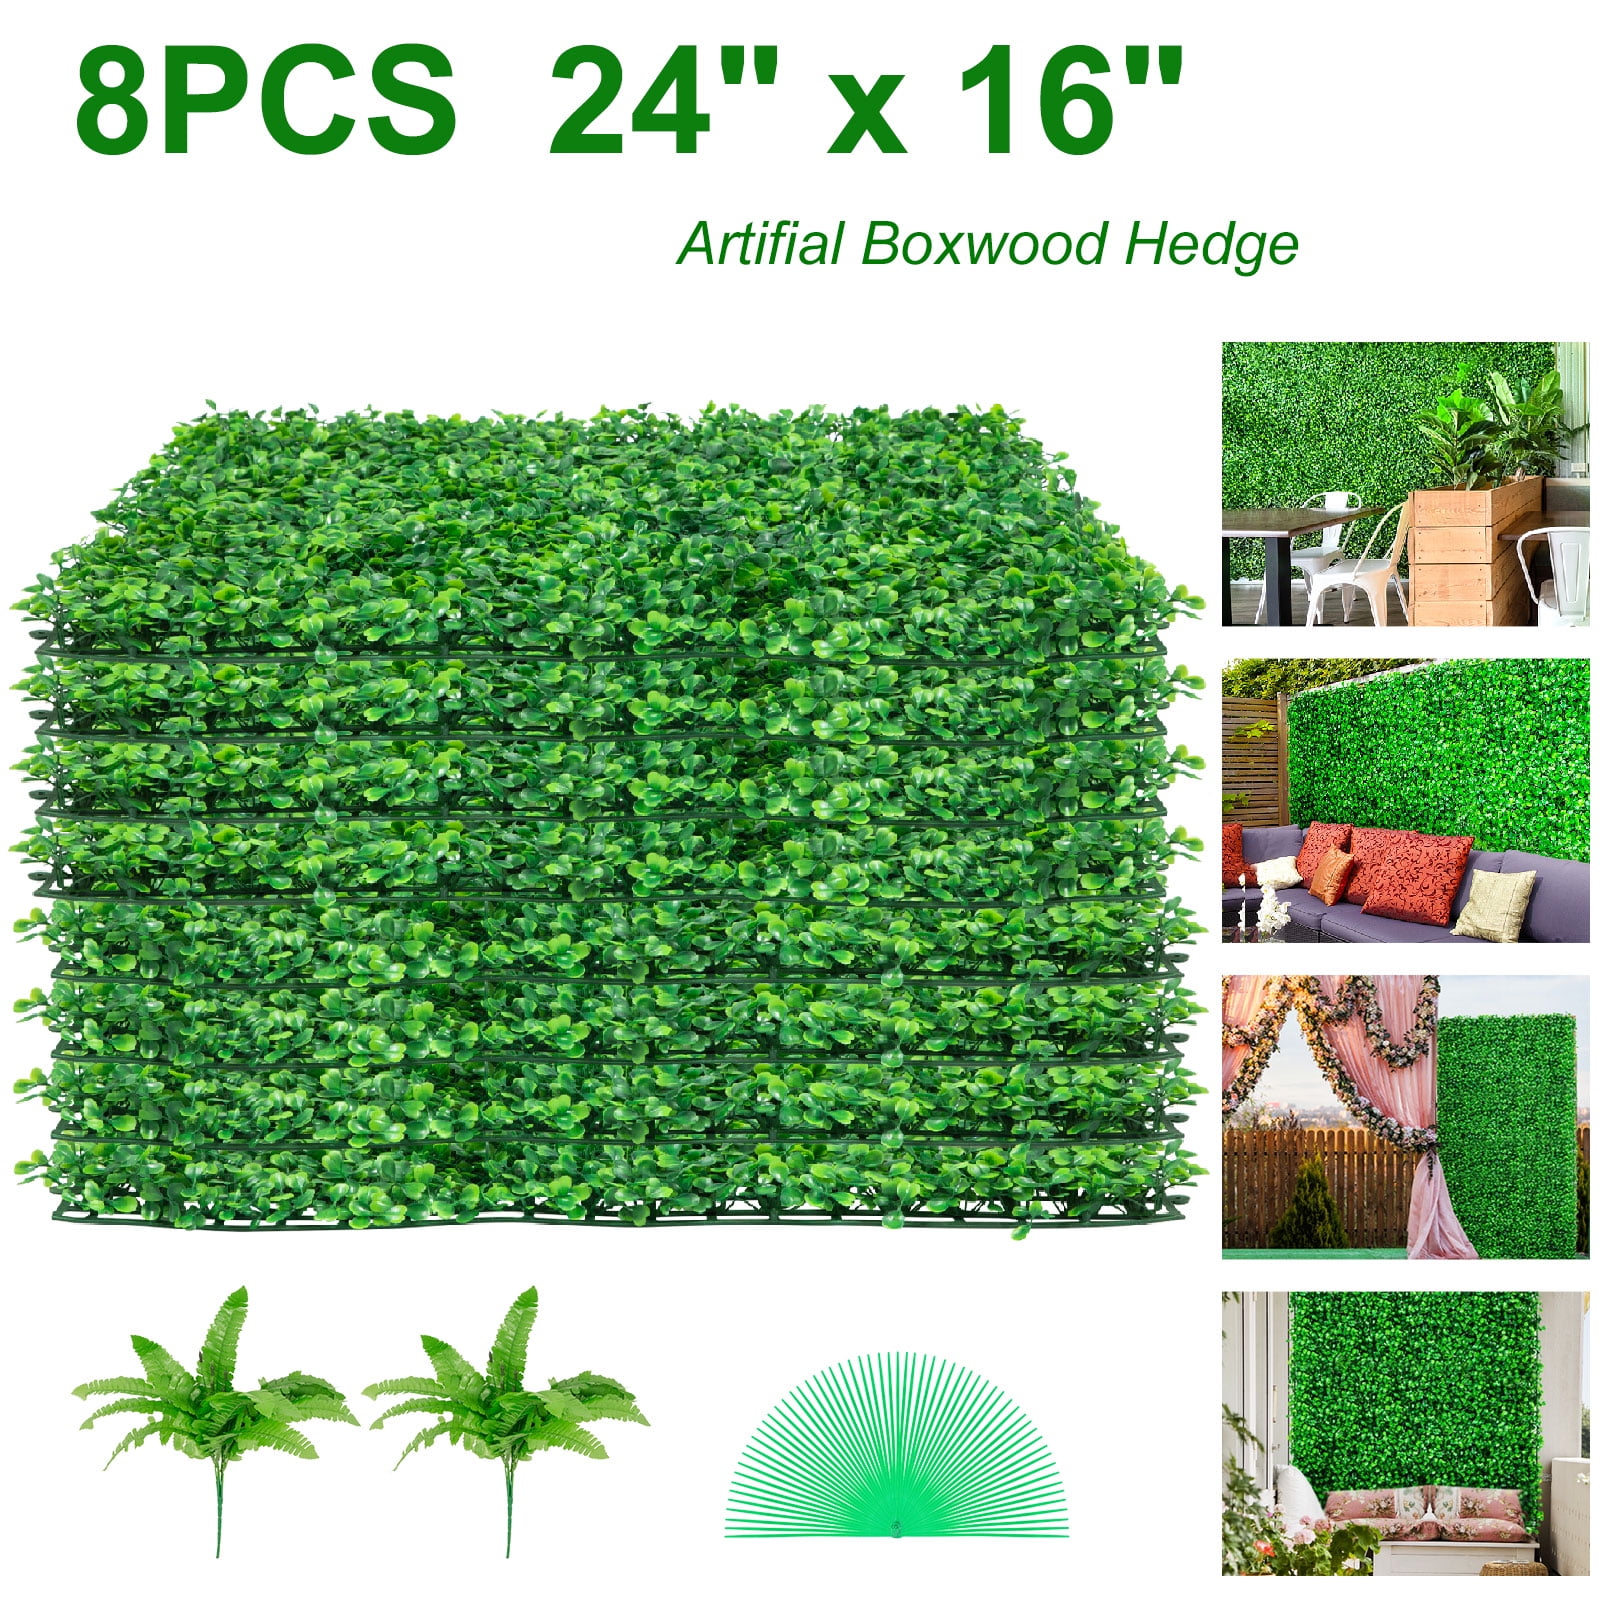 10"x10" 24"x16" Artificial UV Boxwood Mat Wall Hedge with Ties Fake Grass Fence 